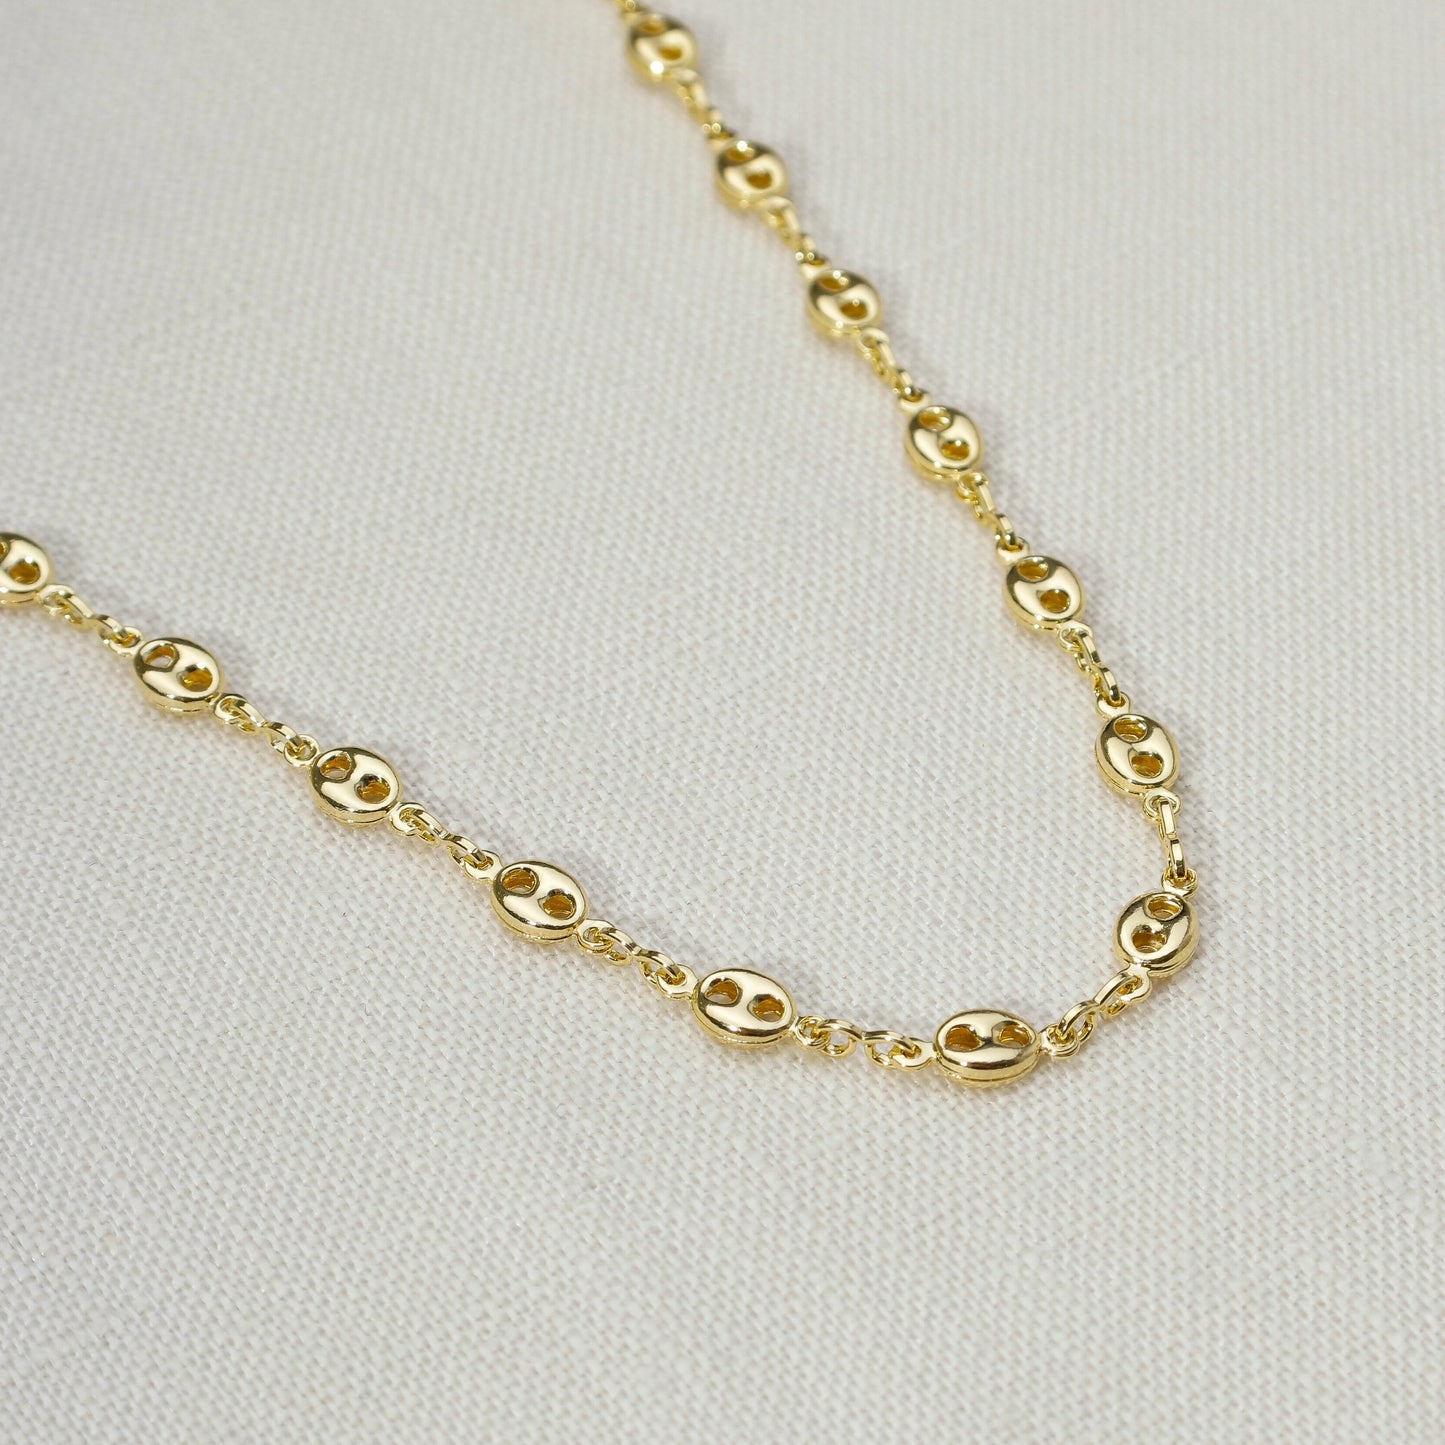 18k Gold Filled Fancy Puff Links Chain Necklace